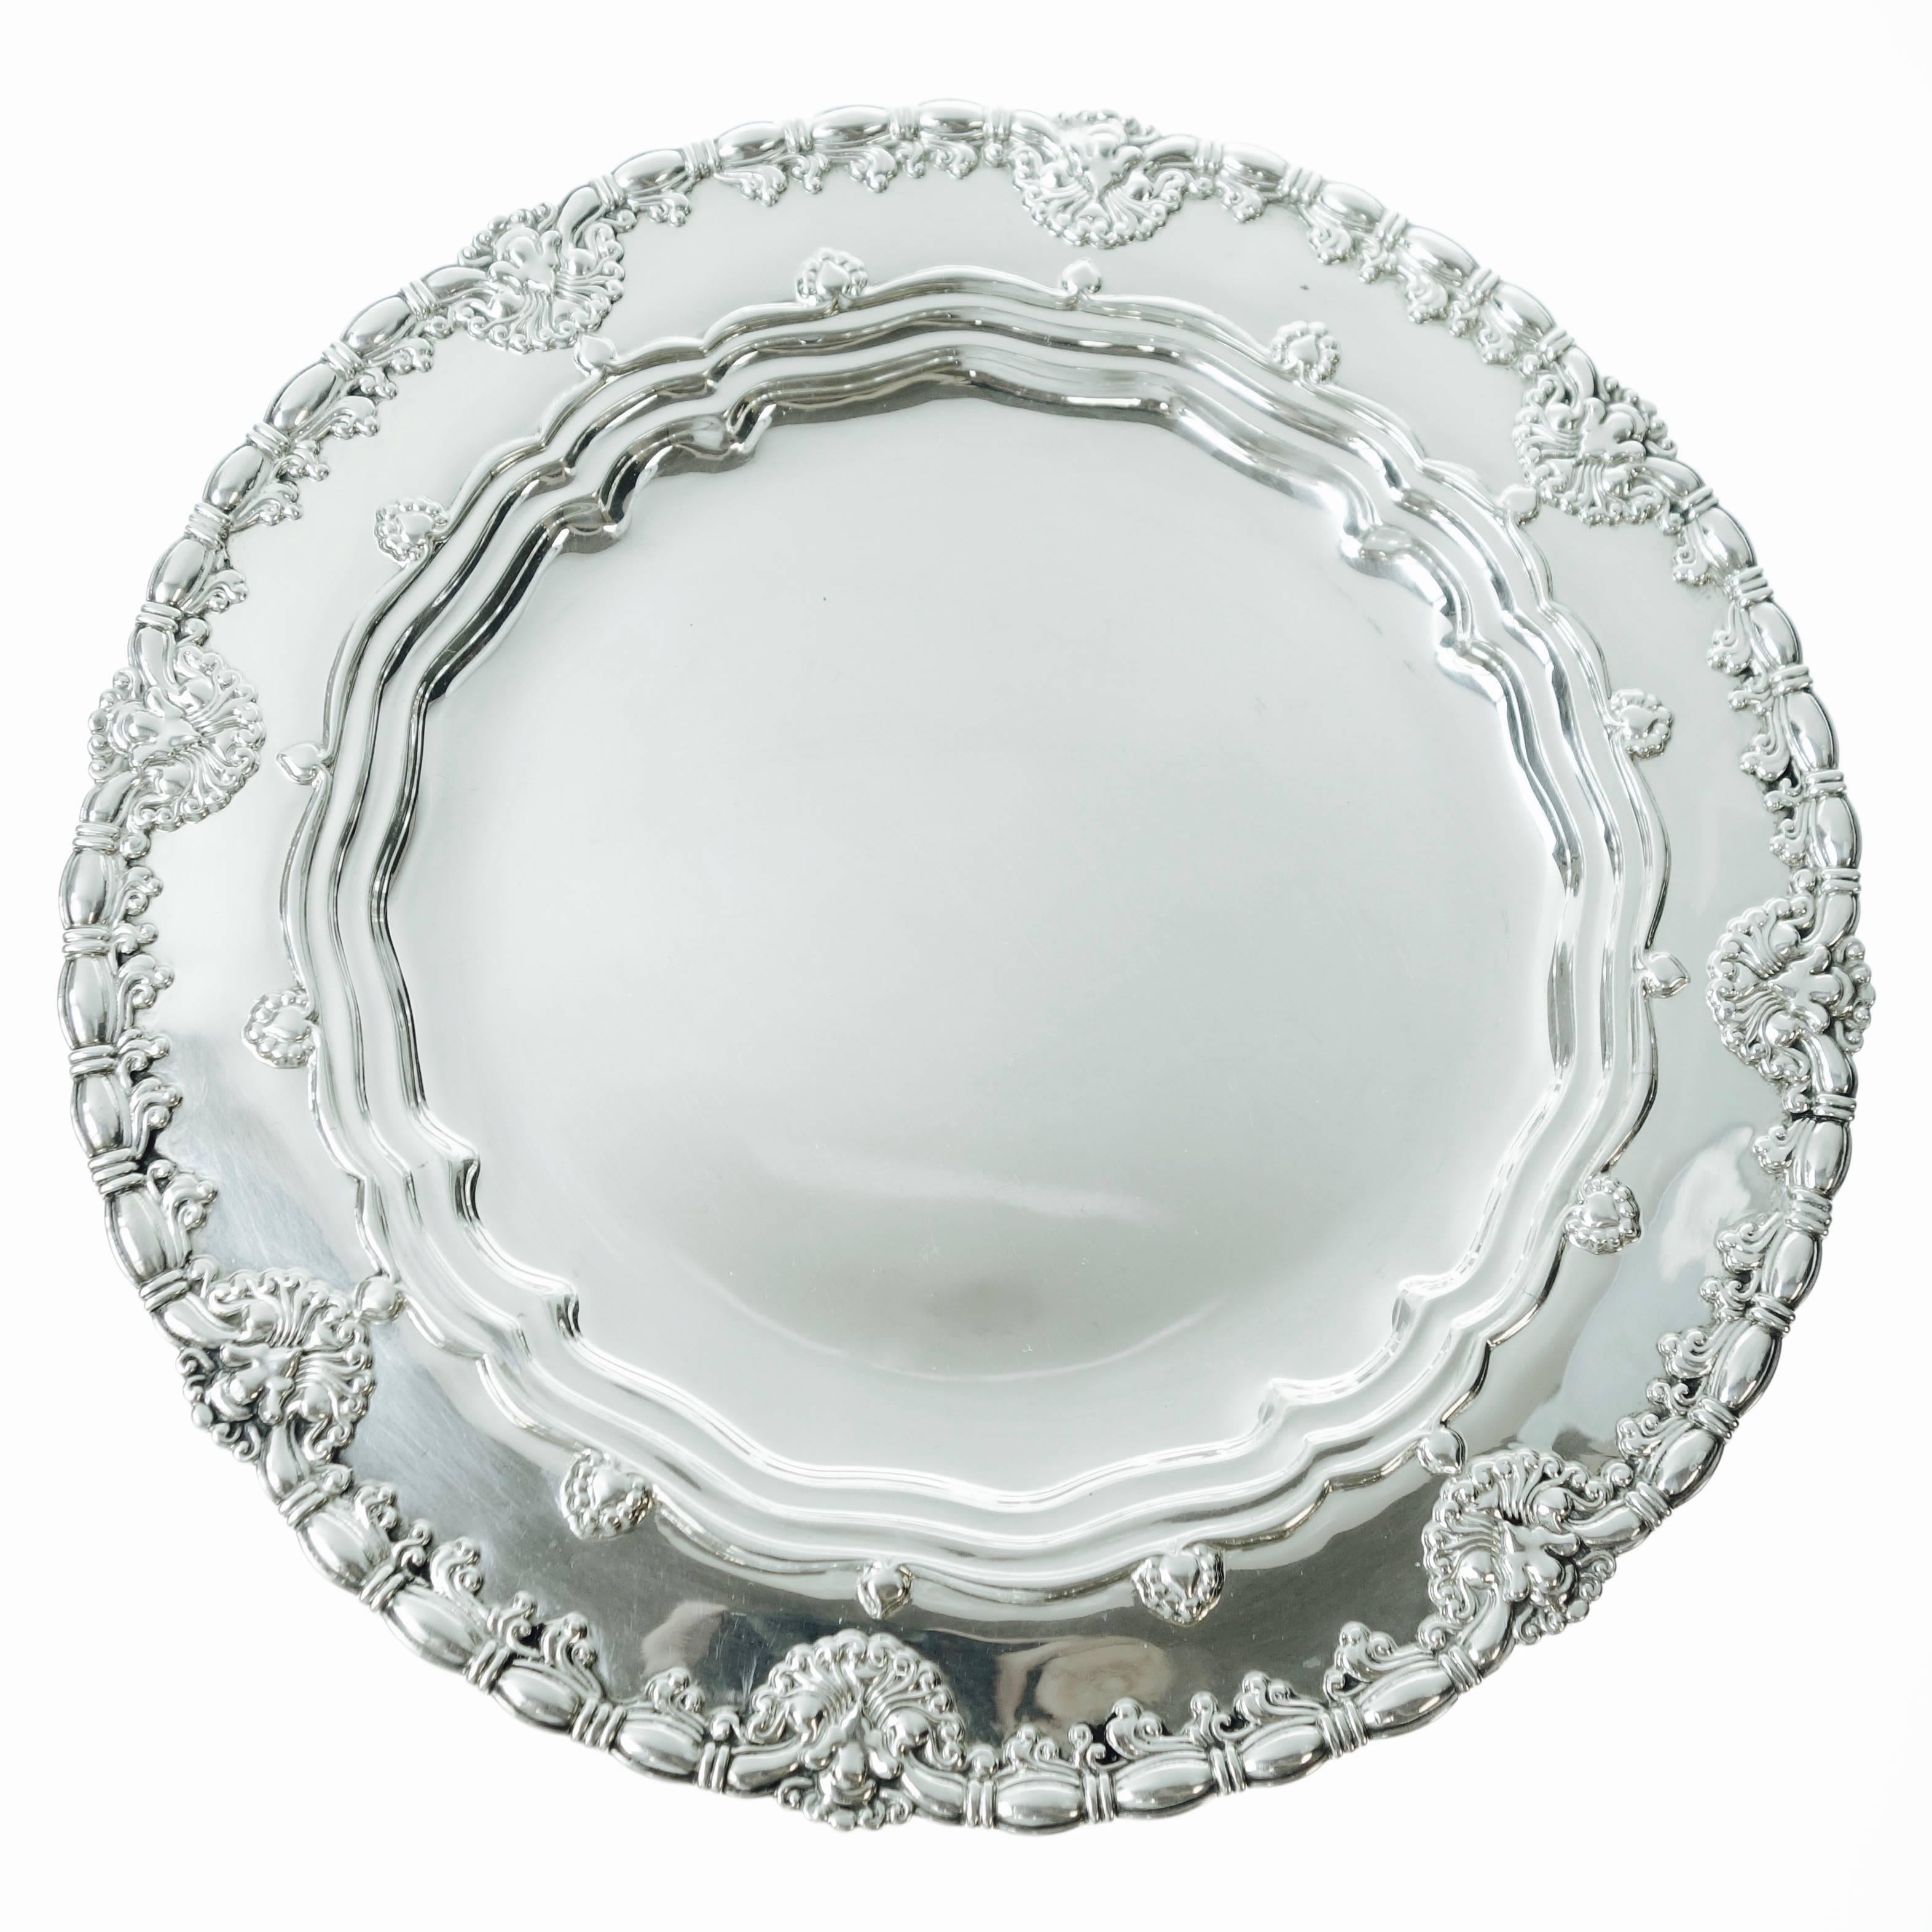 Tiffany & Co. Sterling Silver Plates Set of Ten, Circa 1905 For Sale